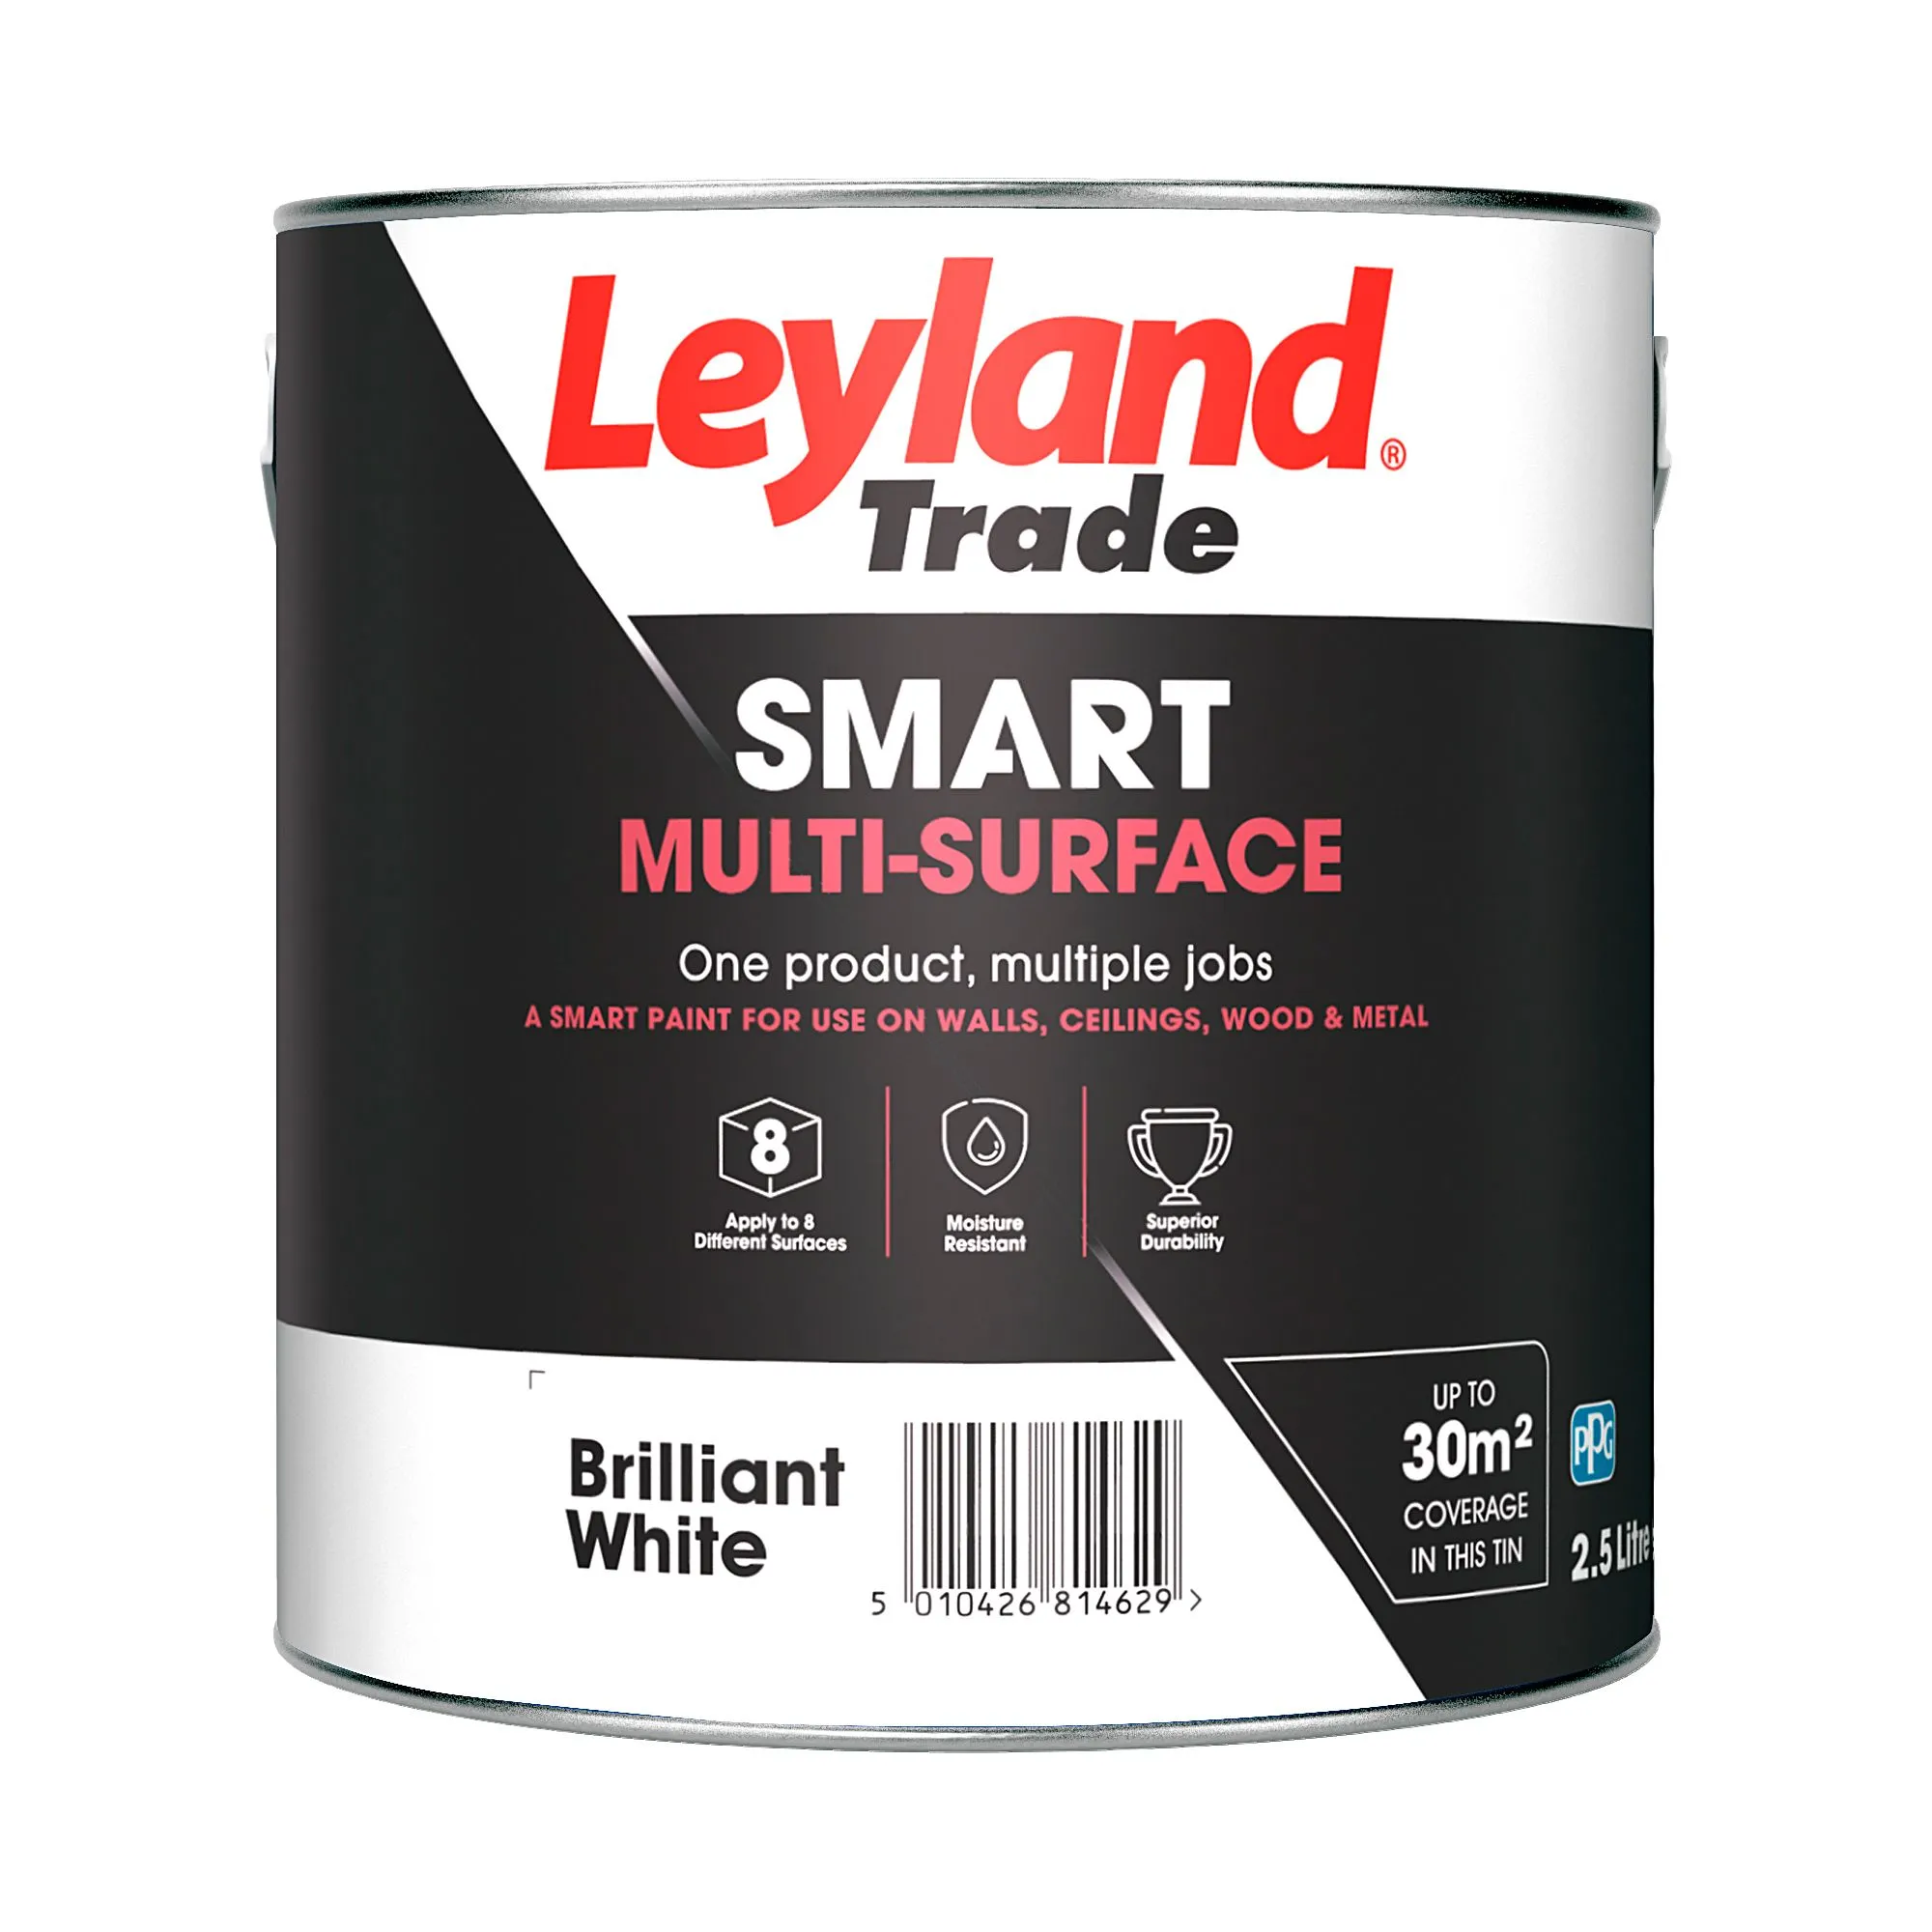 Leyland Trade Smart Brilliant white Mid sheen Multi-surface paint, 2.5L